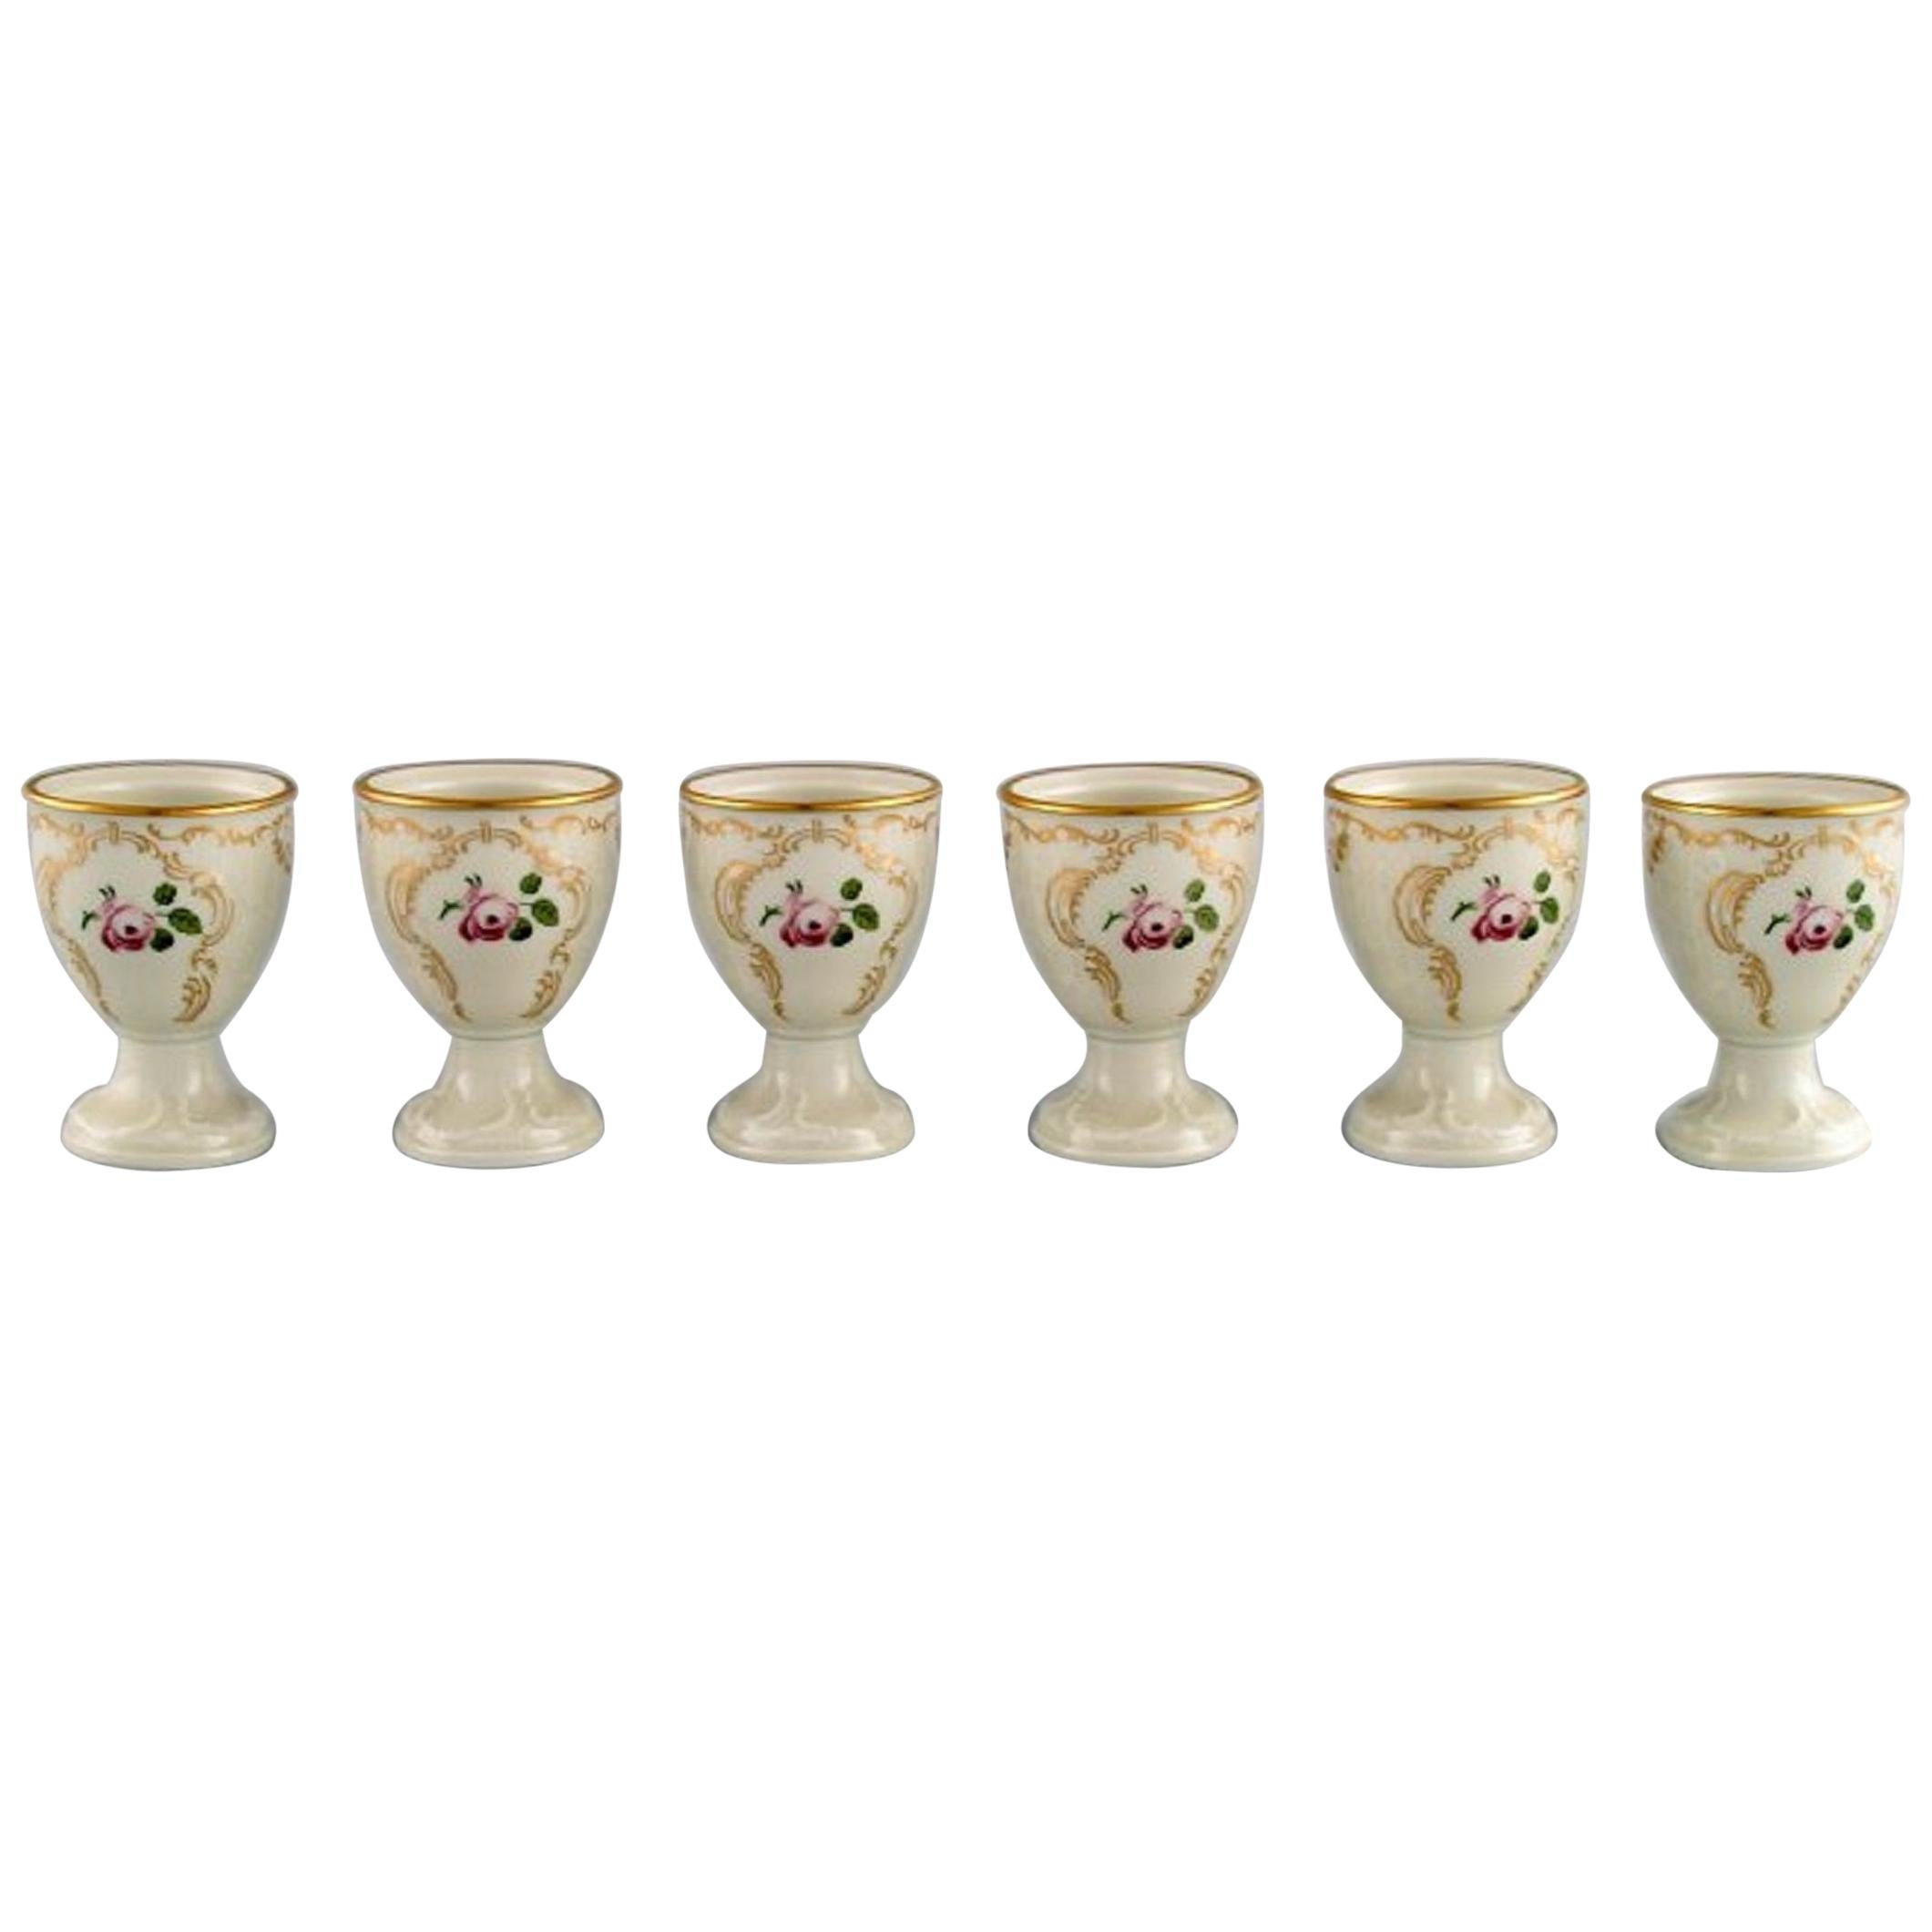 Six Rosenthal Classic Rose Egg Cups in Hand Painted Porcelain, Mid-20th Century For Sale